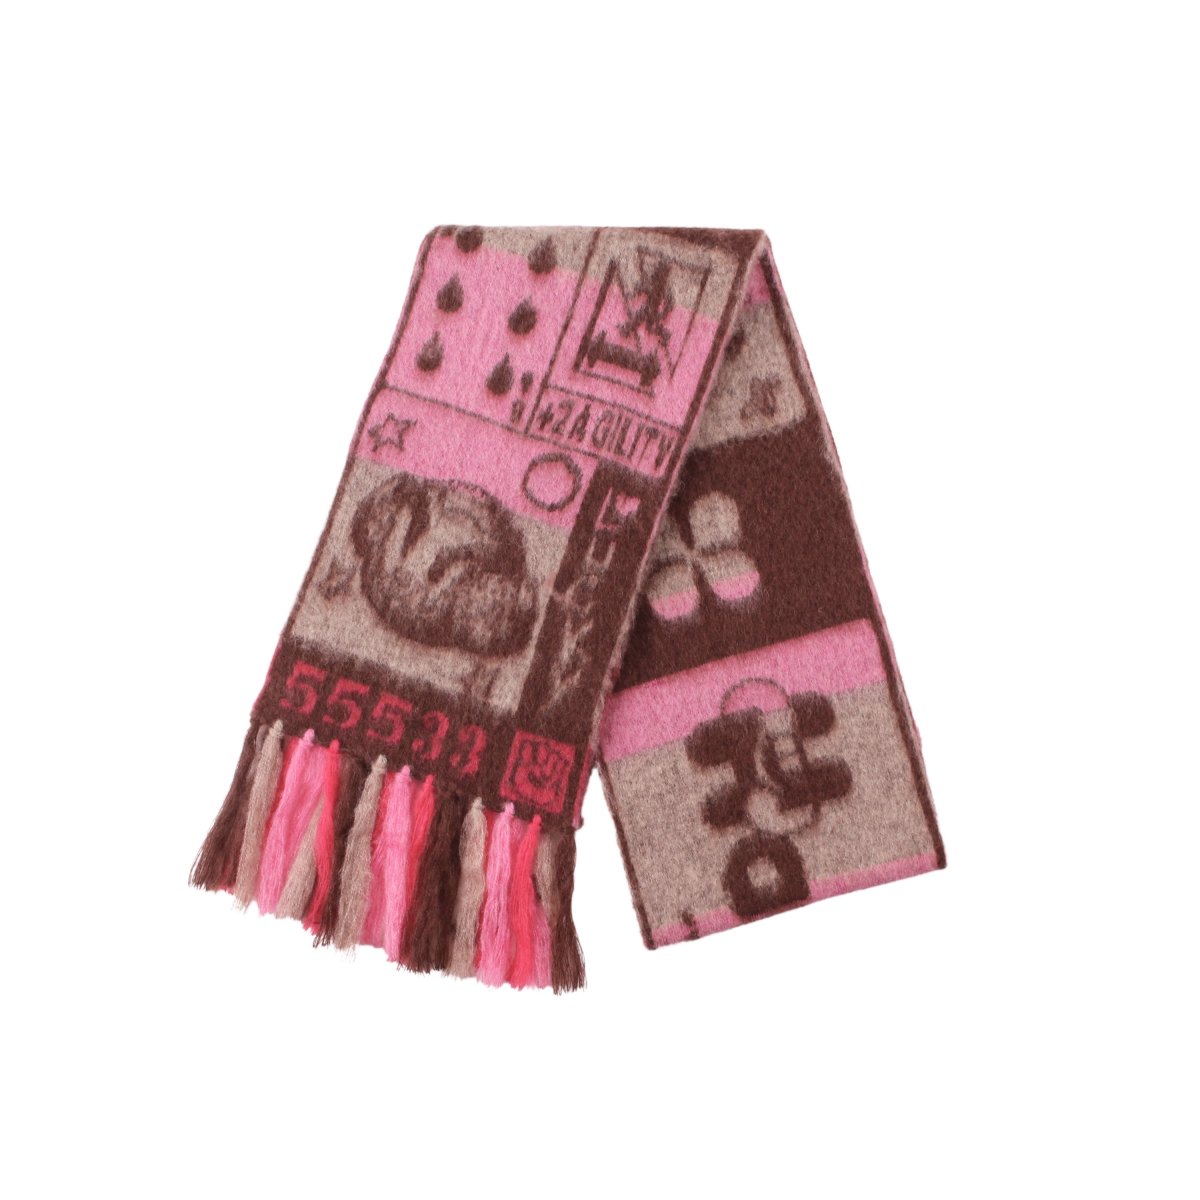 Agility ScarfPink / Brown